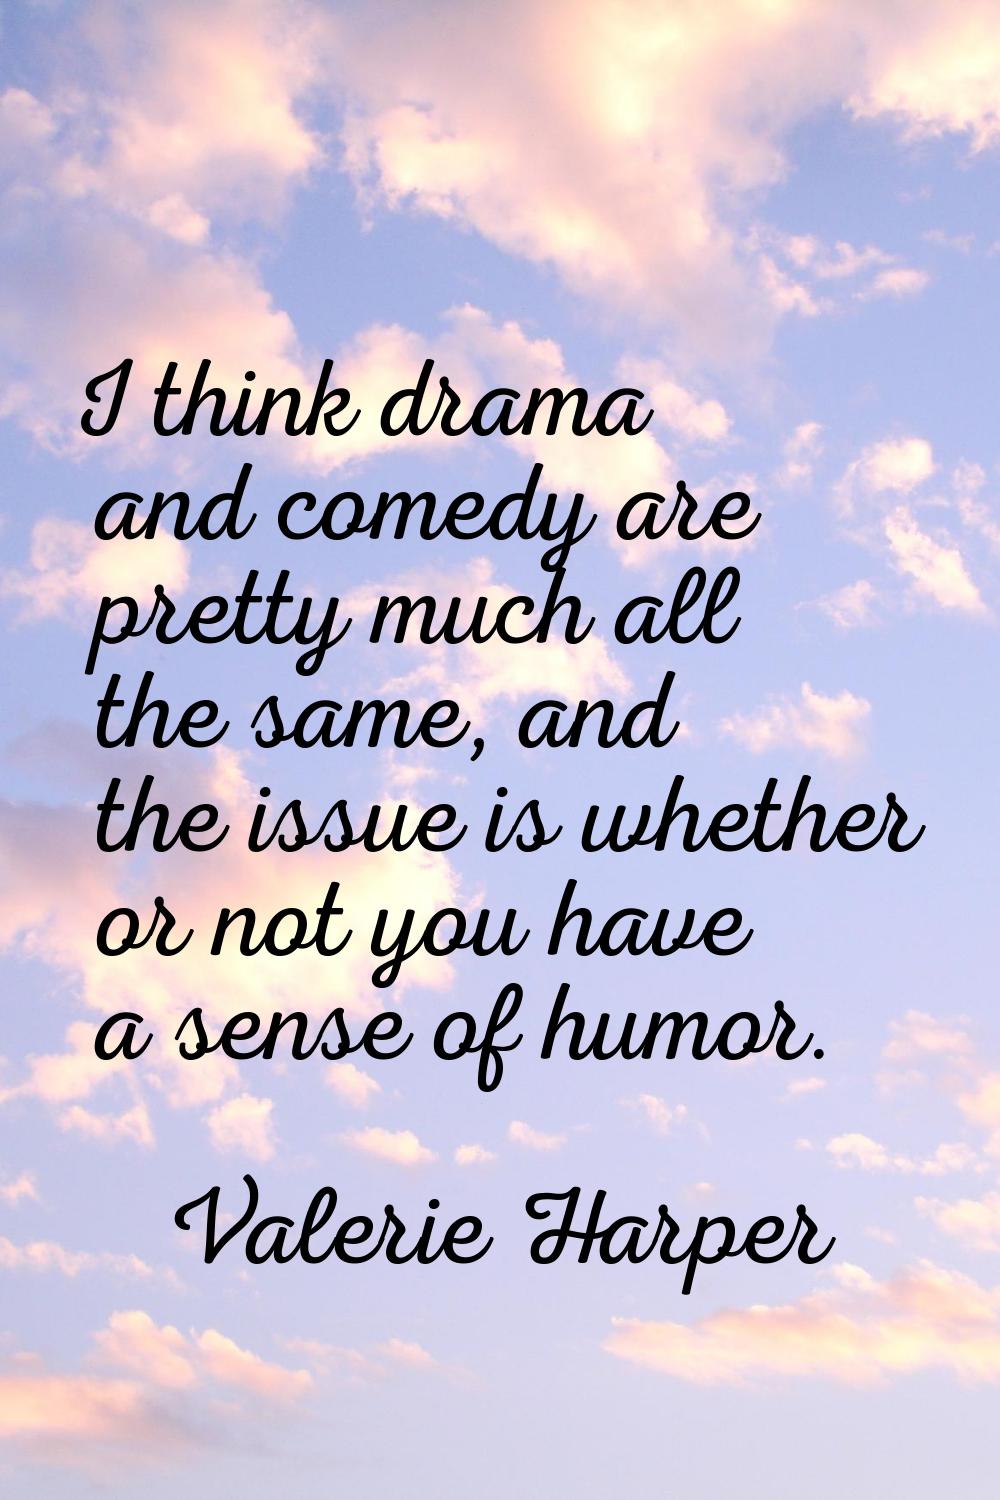 I think drama and comedy are pretty much all the same, and the issue is whether or not you have a s